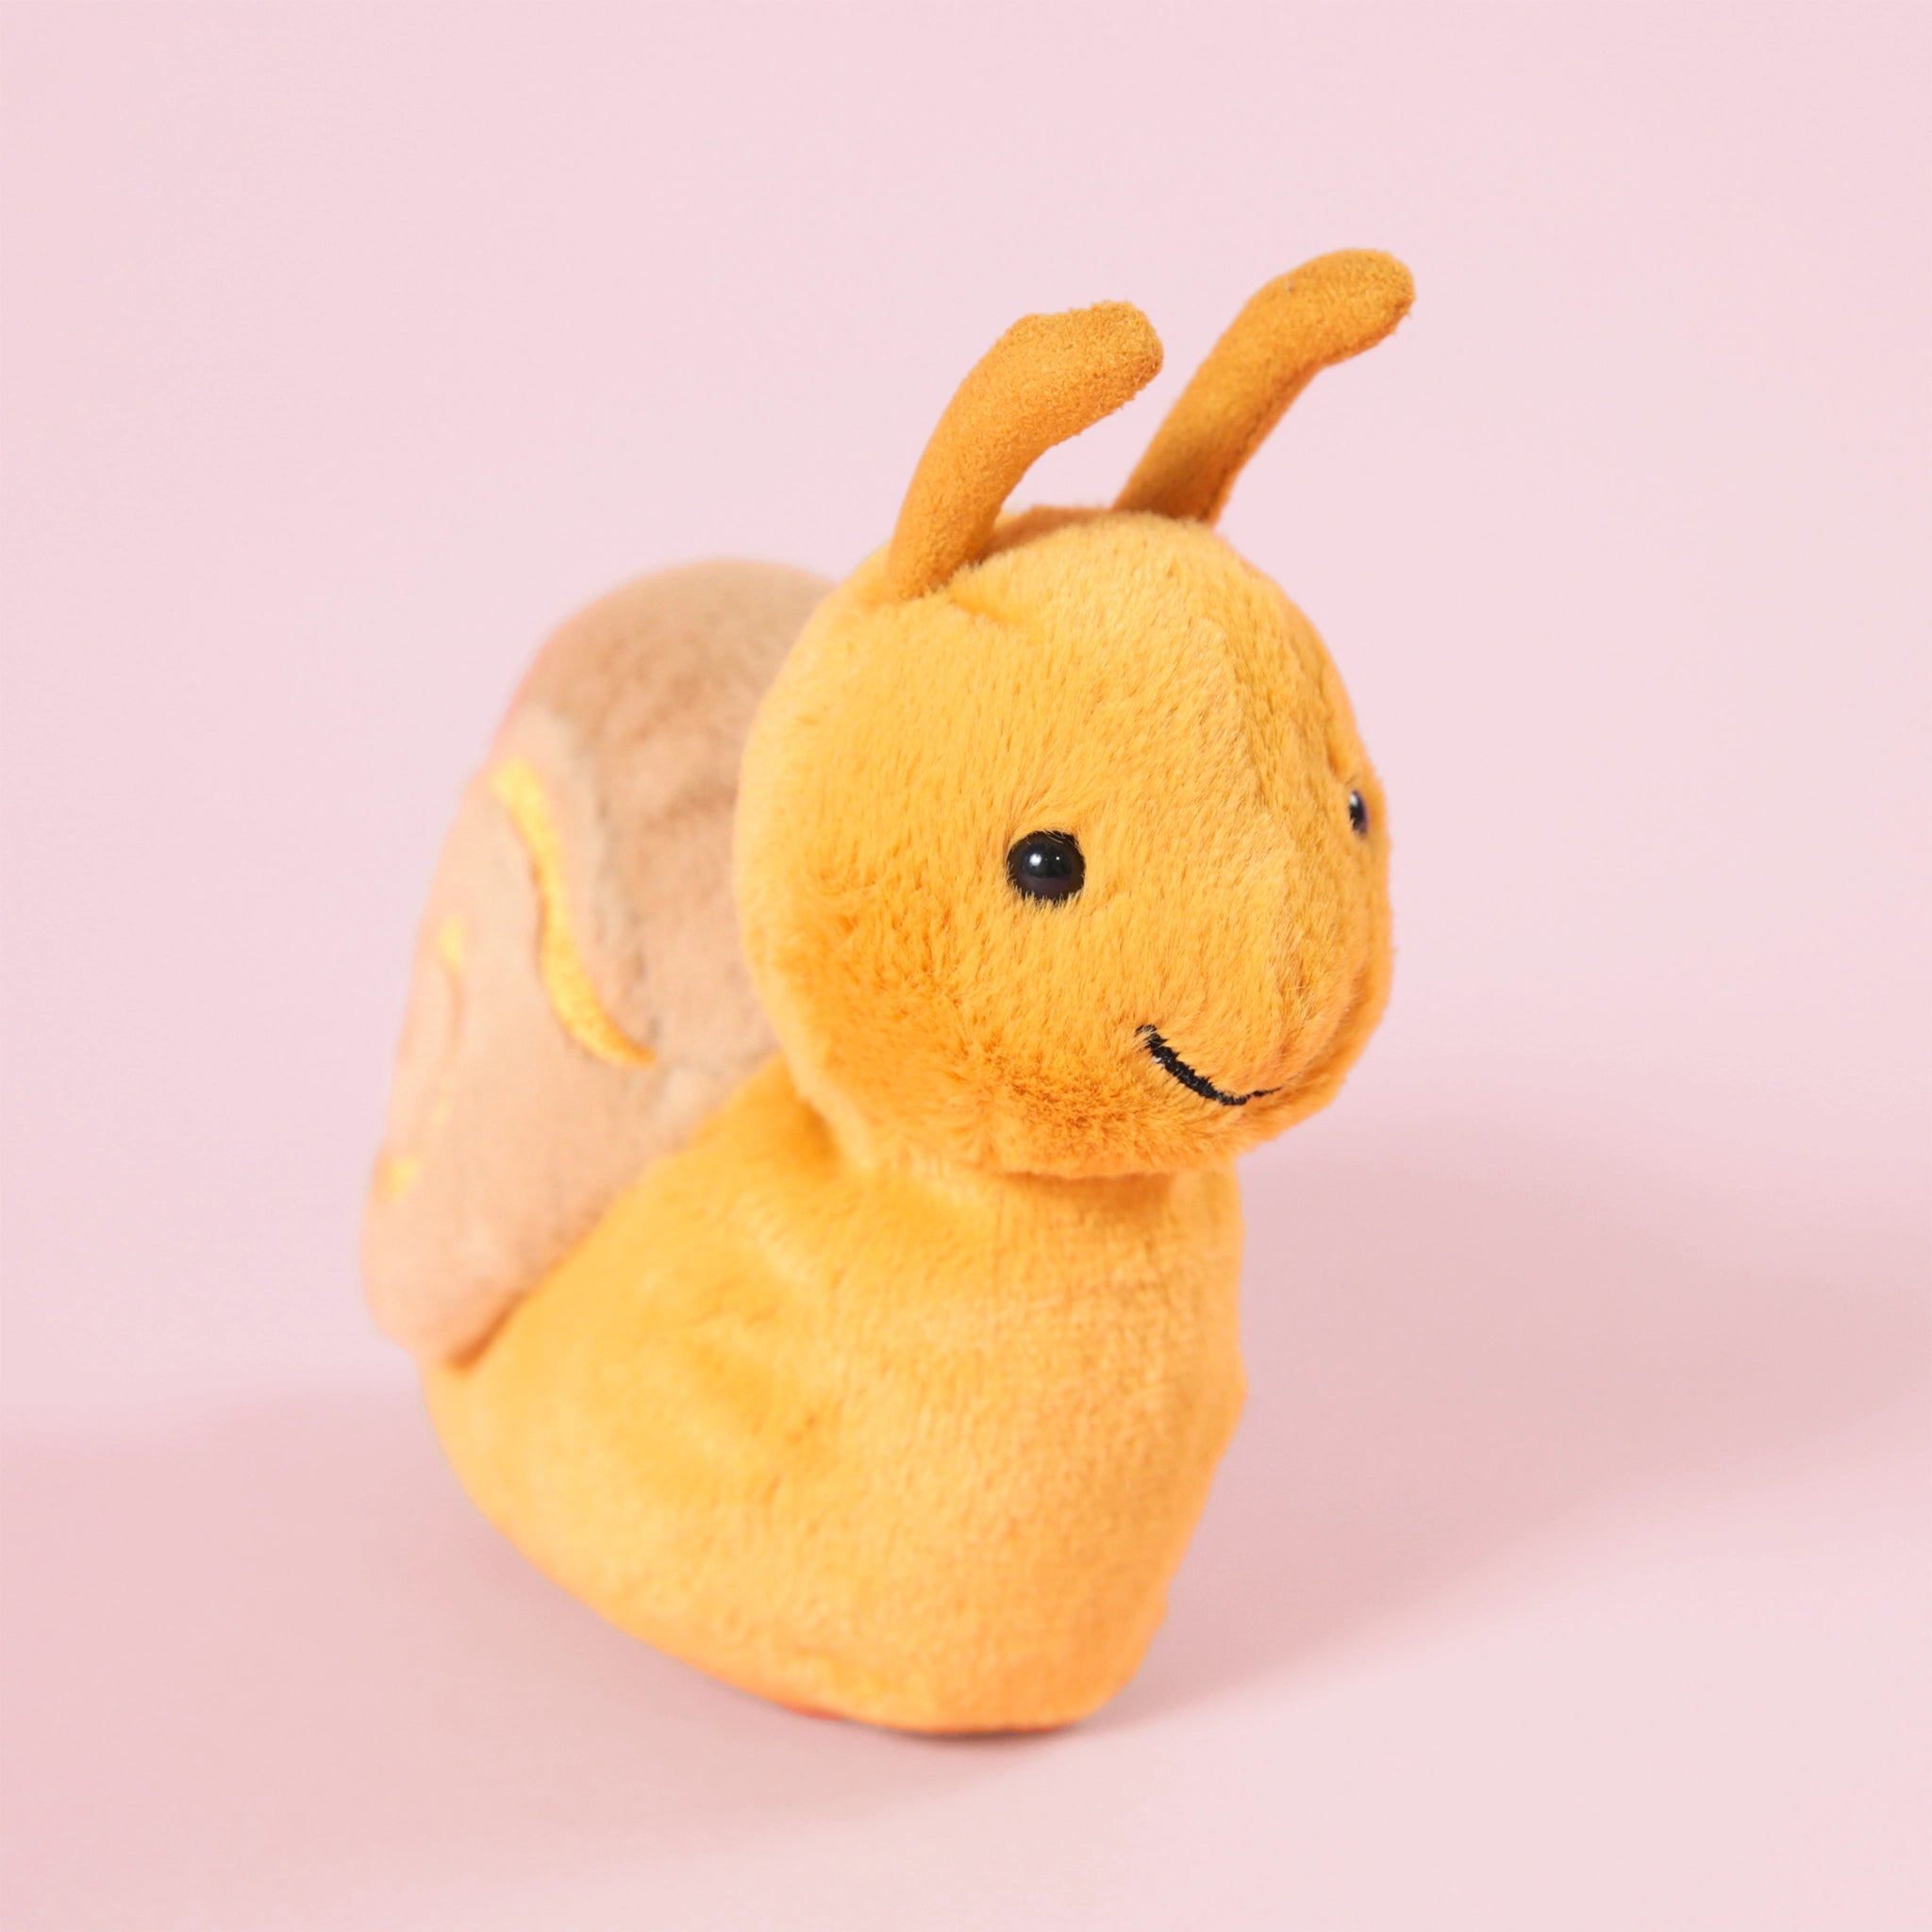 A yellow snail stuffed animal with a tan shell and a swirl design in the center and a smiling face.